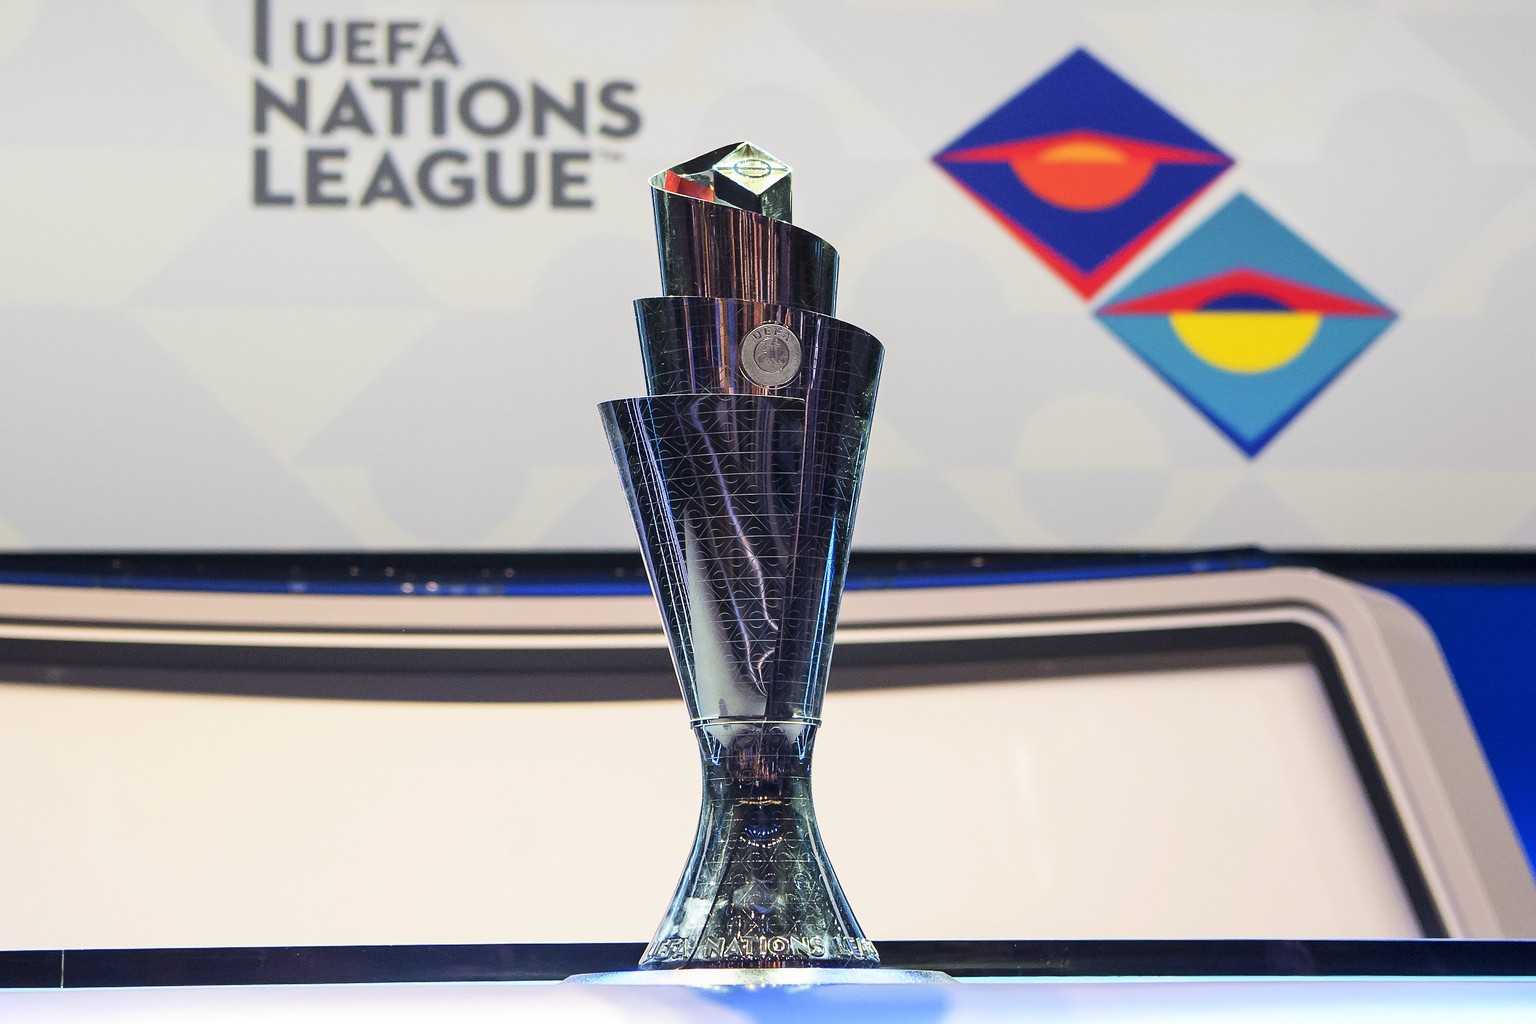 epa06470393 The UEFA Nations League trophy on display during the UEFA Nations League draw at the SwissTech Convention Center in Lausanne, Switzerland, 24 January 2018. EPA/JEAN-CHRISTOPHE BOTT